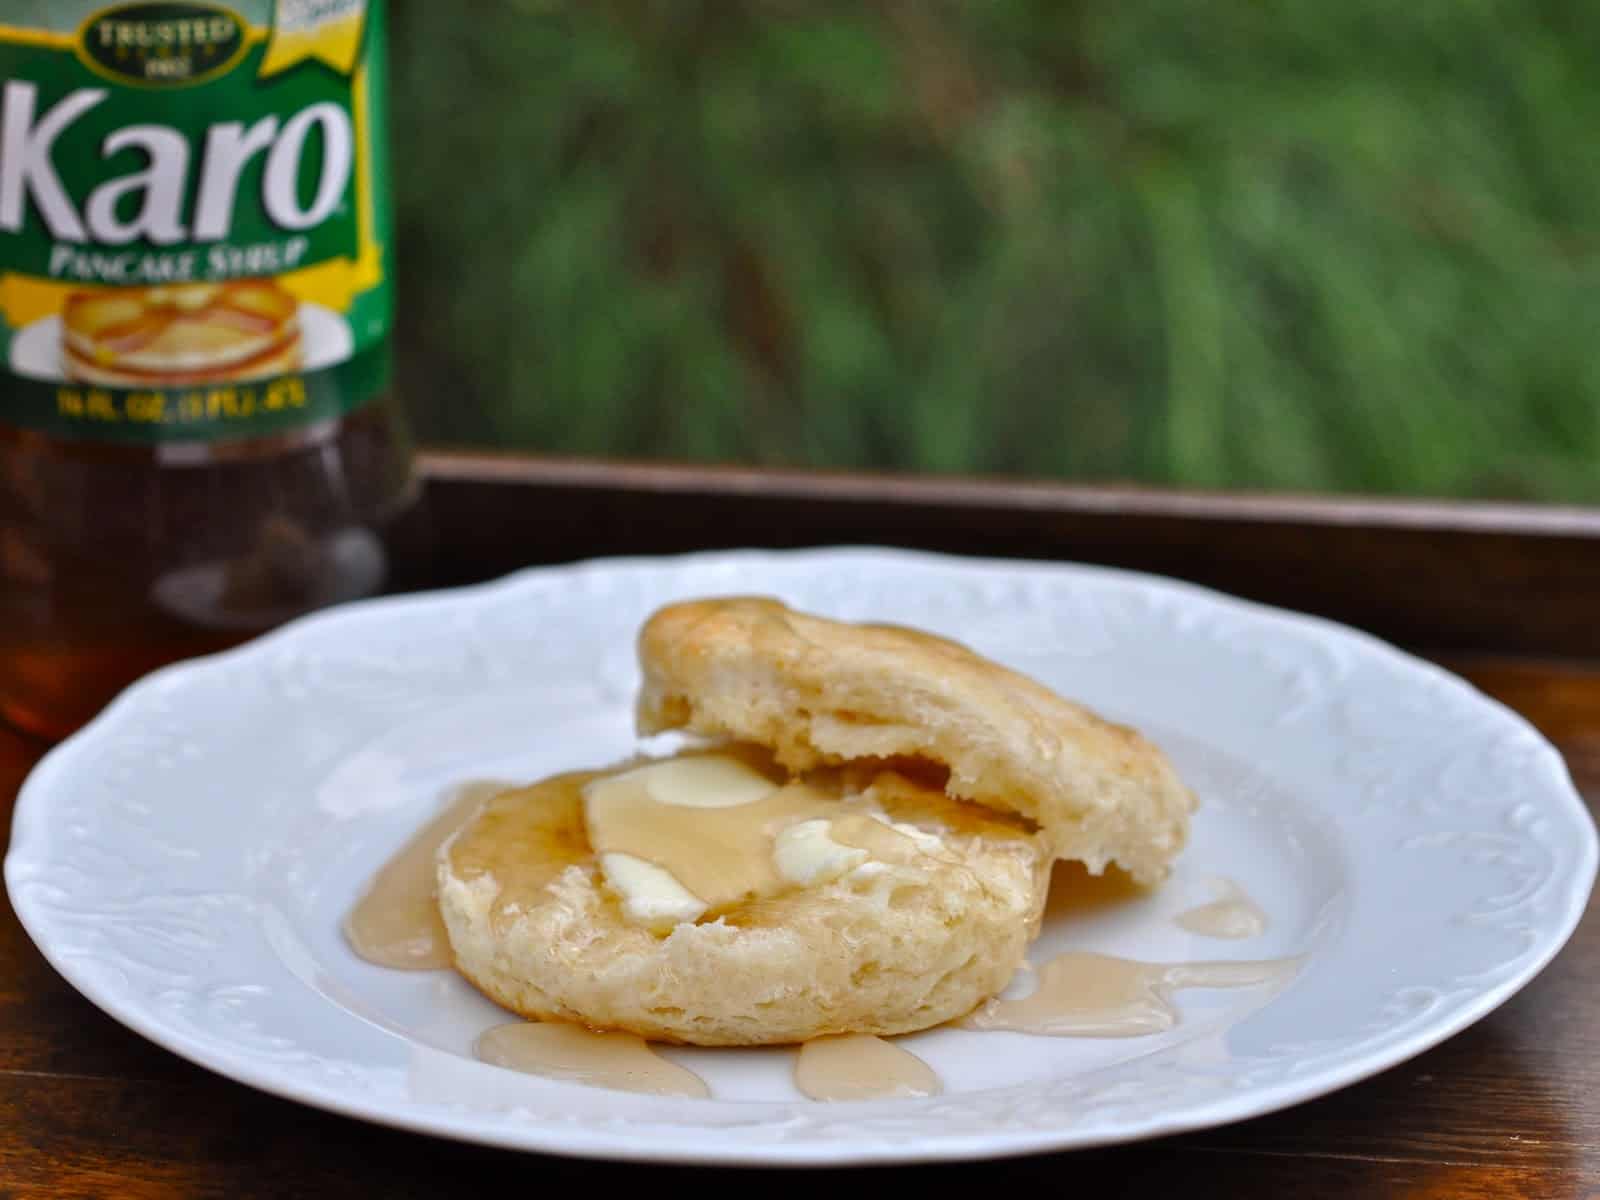 One of Uncle Hal's Biscuits Split and served on a plate with a smear of butter and drizzled with Karo syrup.